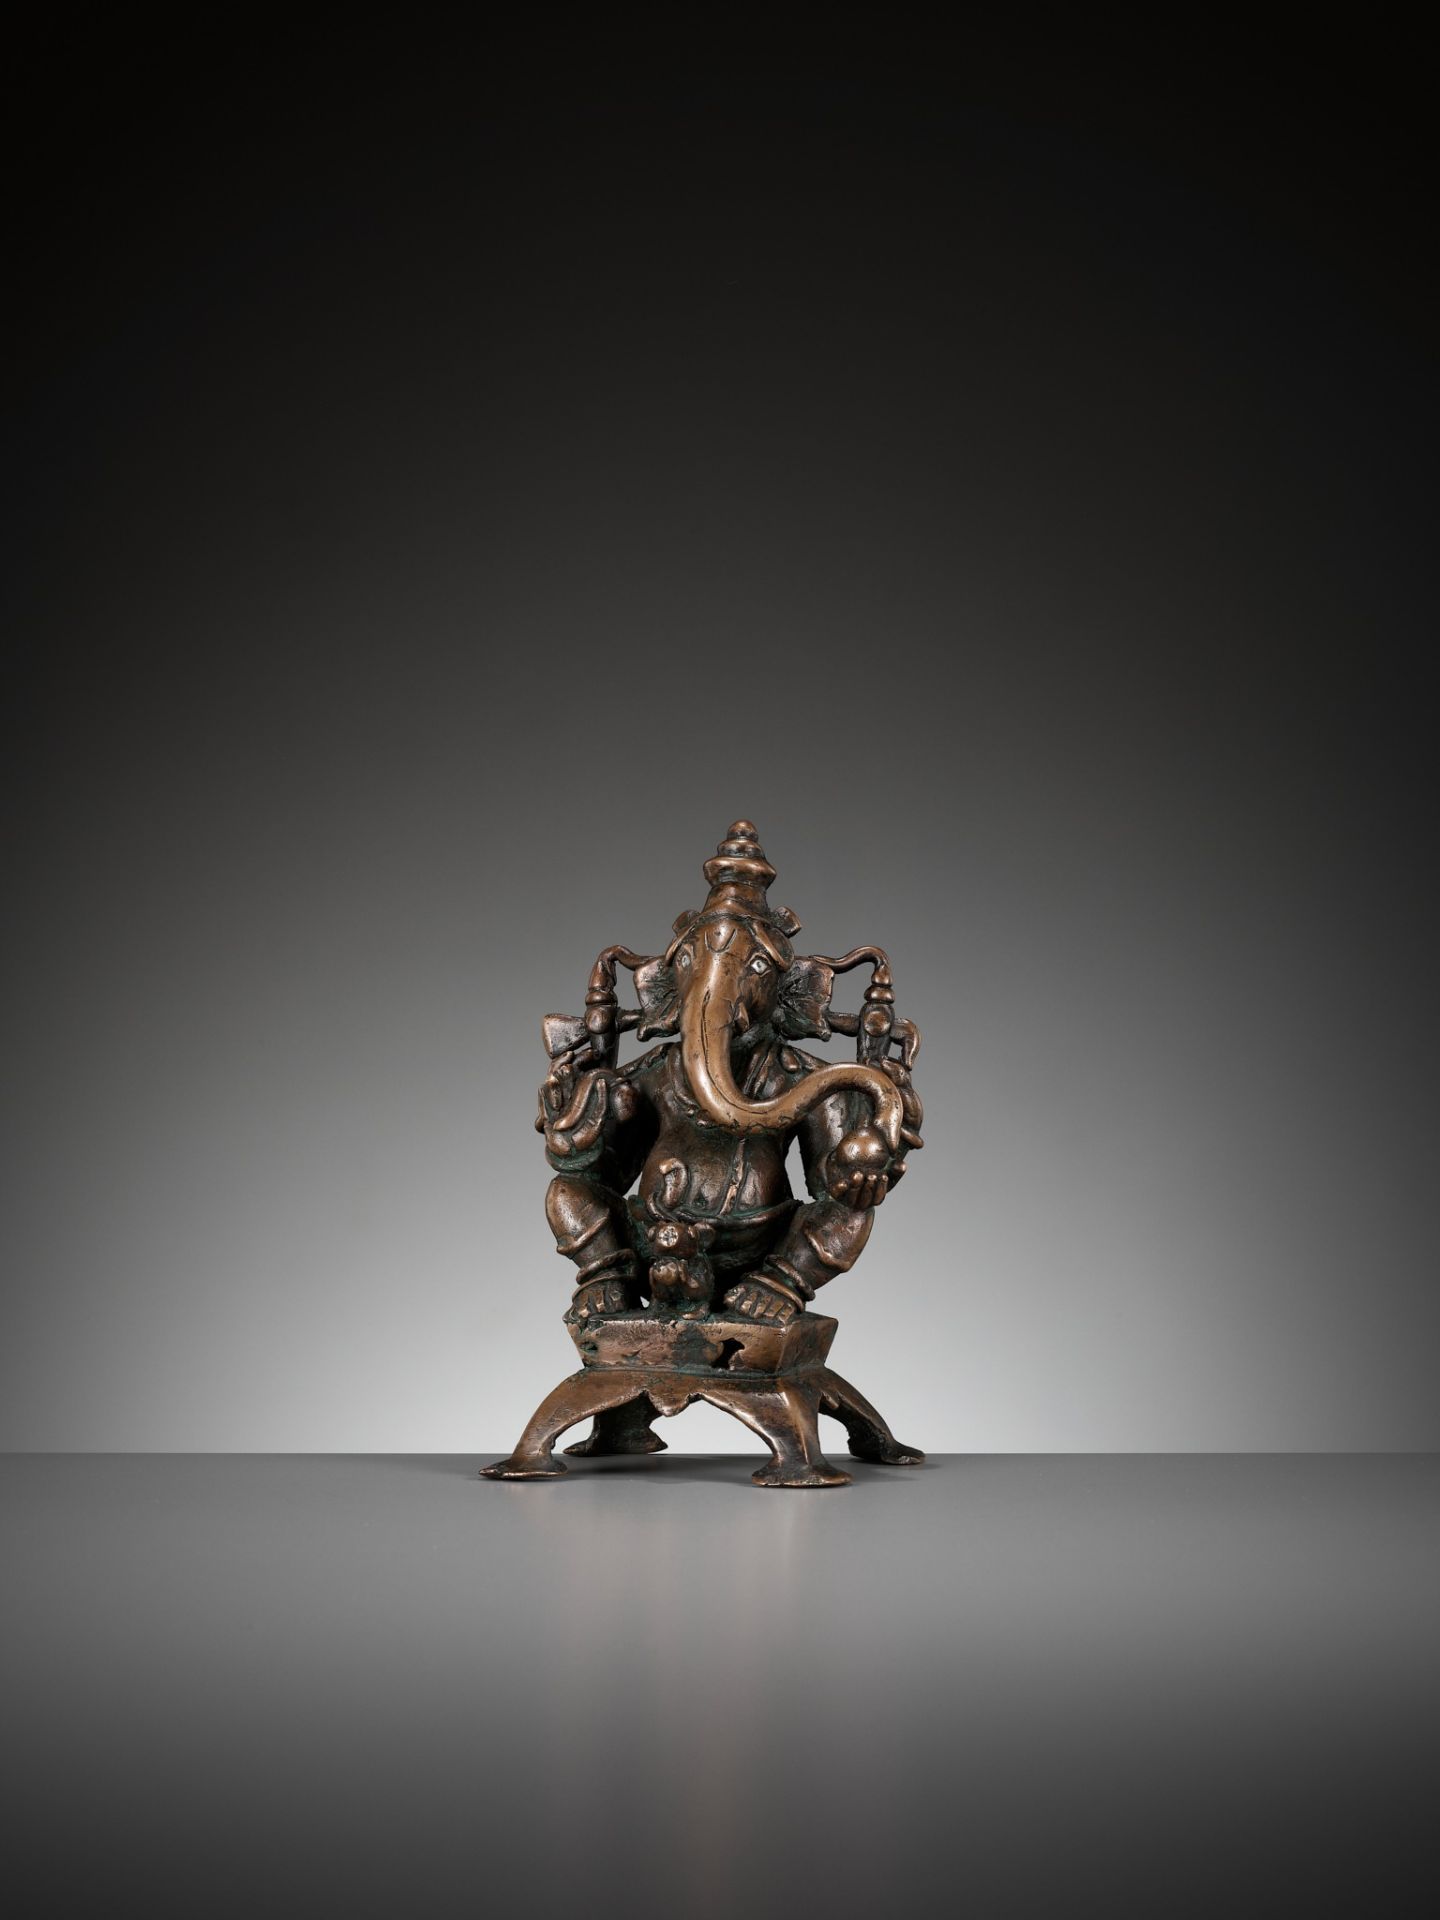 A SILVER-INLAID COPPER ALLOY FIGURE OF GANESHA, SOUTH INDIA, C. 1650-1750 - Image 2 of 12